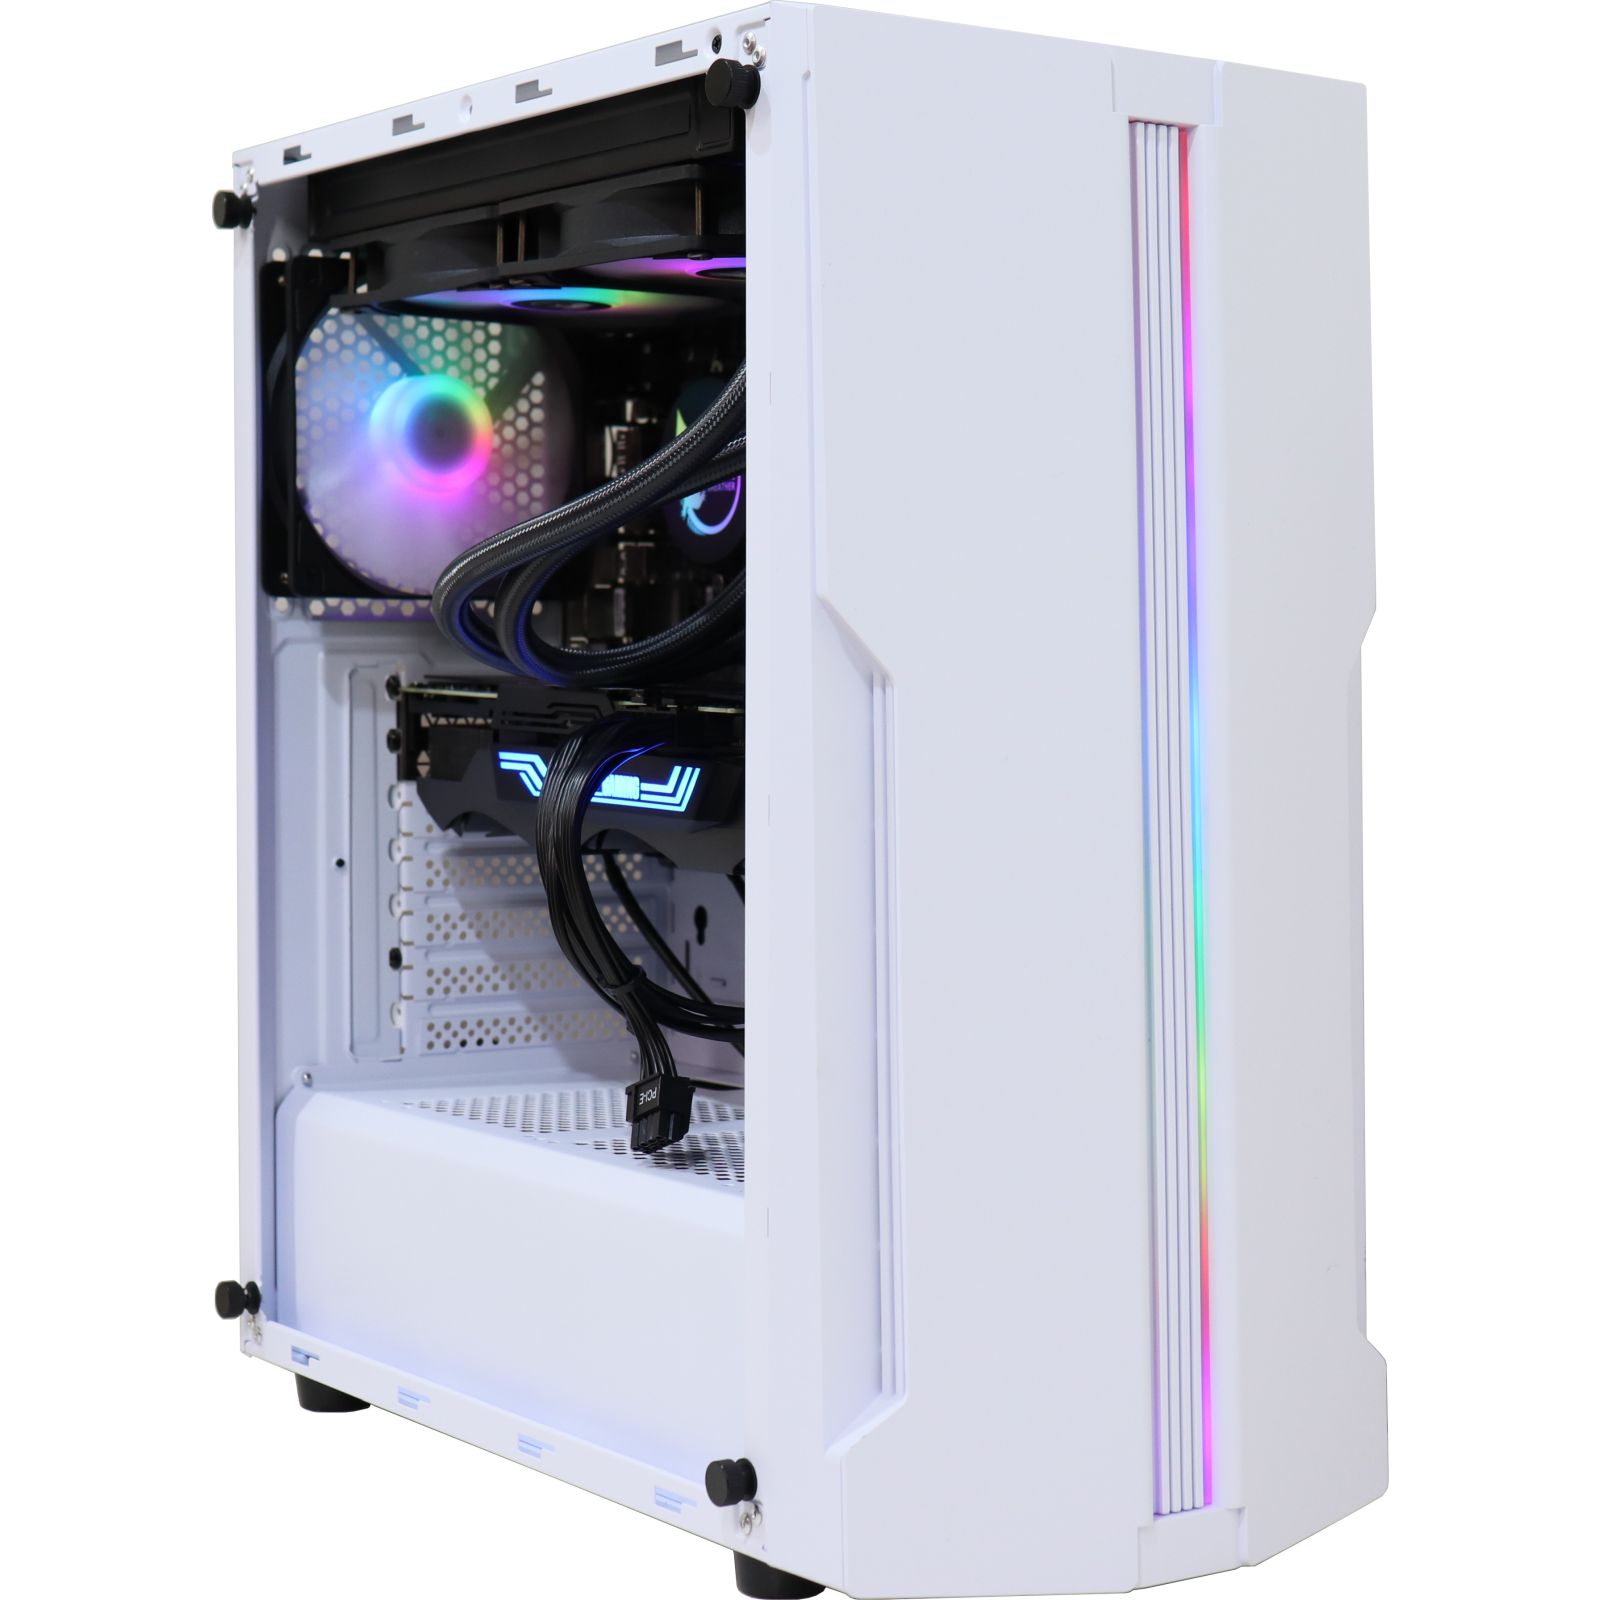 Firebreather White WI2780 Intel Core i7 12700F 12-Core (20 threads) tot 4.9Ghz Nvidia Geforce RTX 3080 10GB grafische kaart 500GB NVME SSD 16GB DDR4